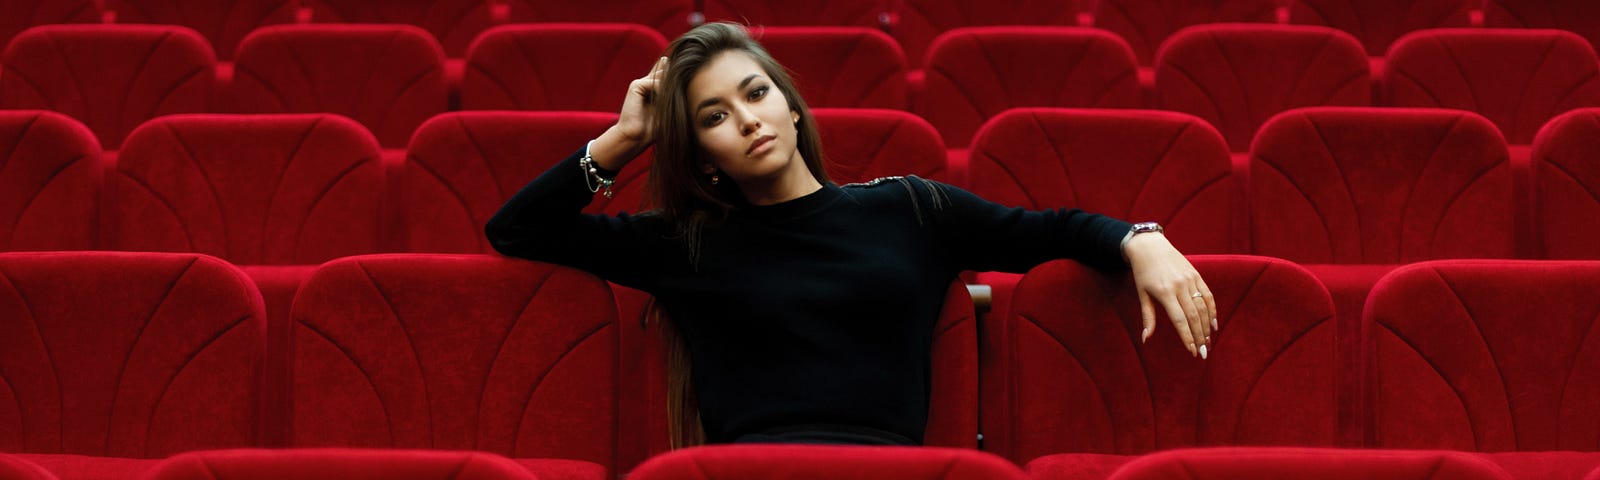 Actor sitting in empty theater